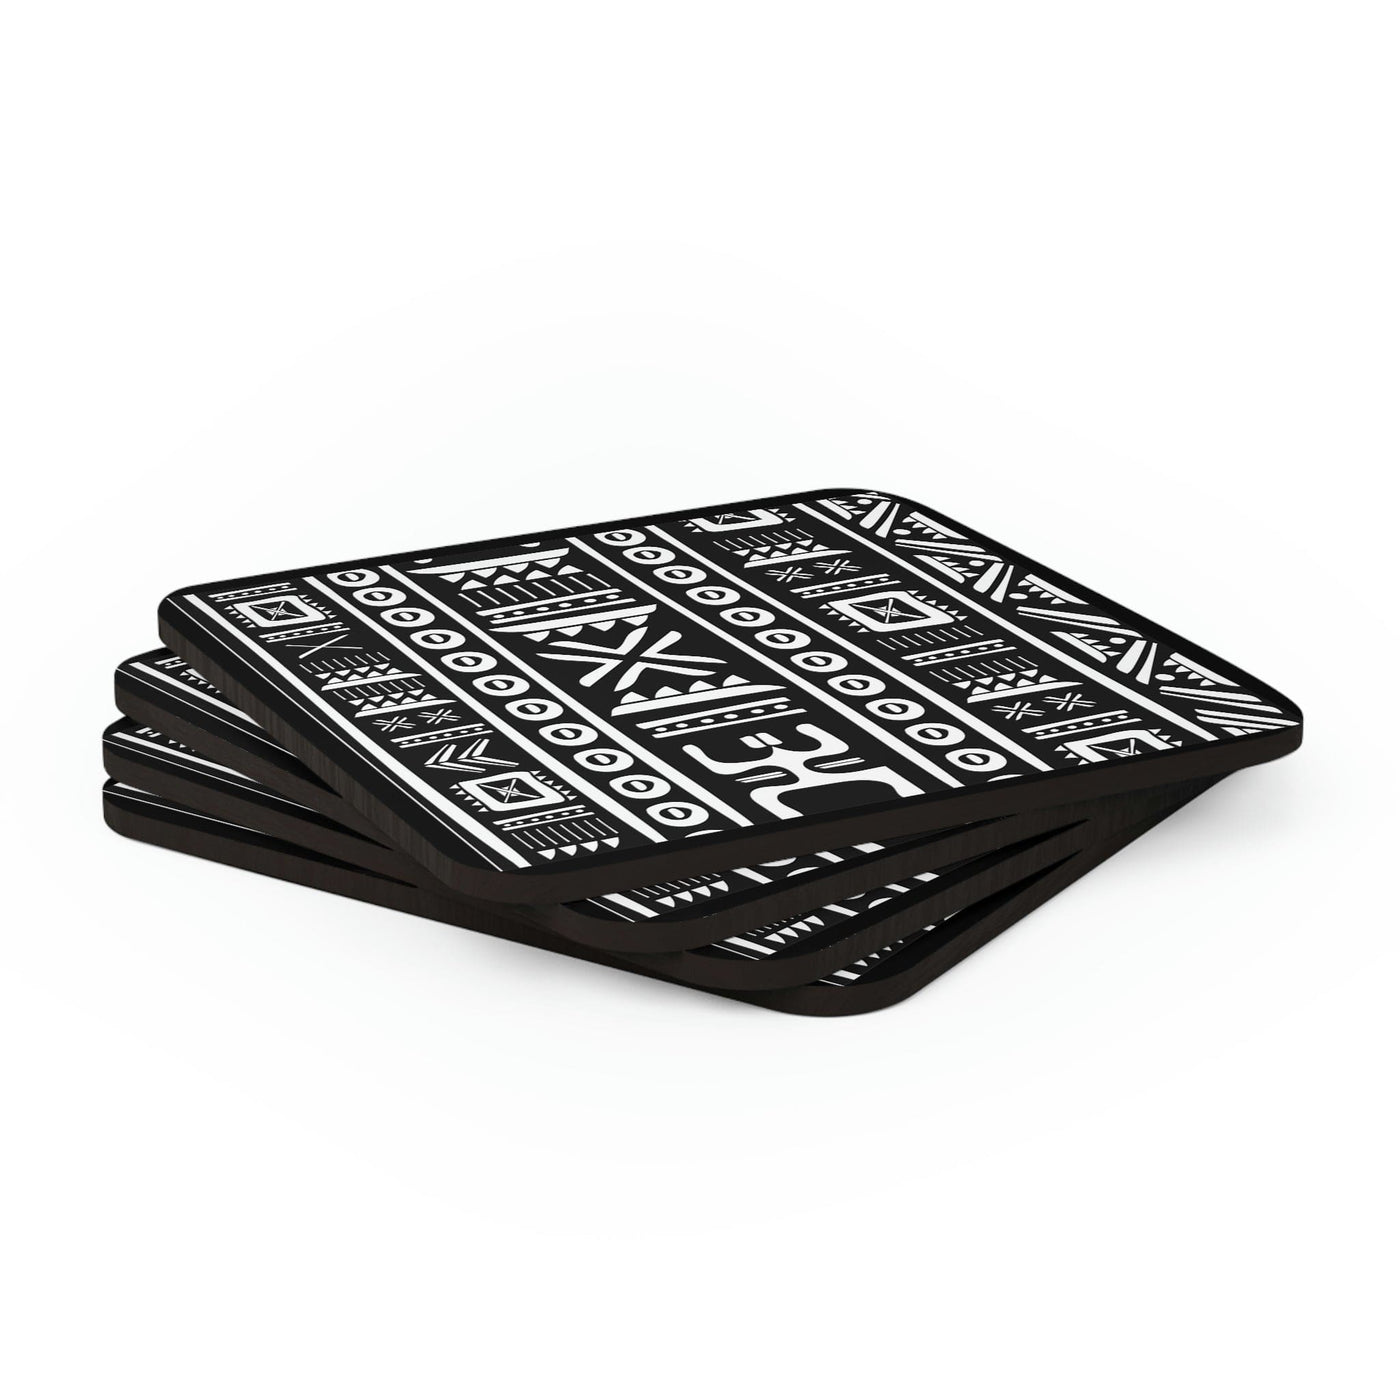 Decor - Coaster Set 4 Piece Home/office Black And White Tribal Pattern African